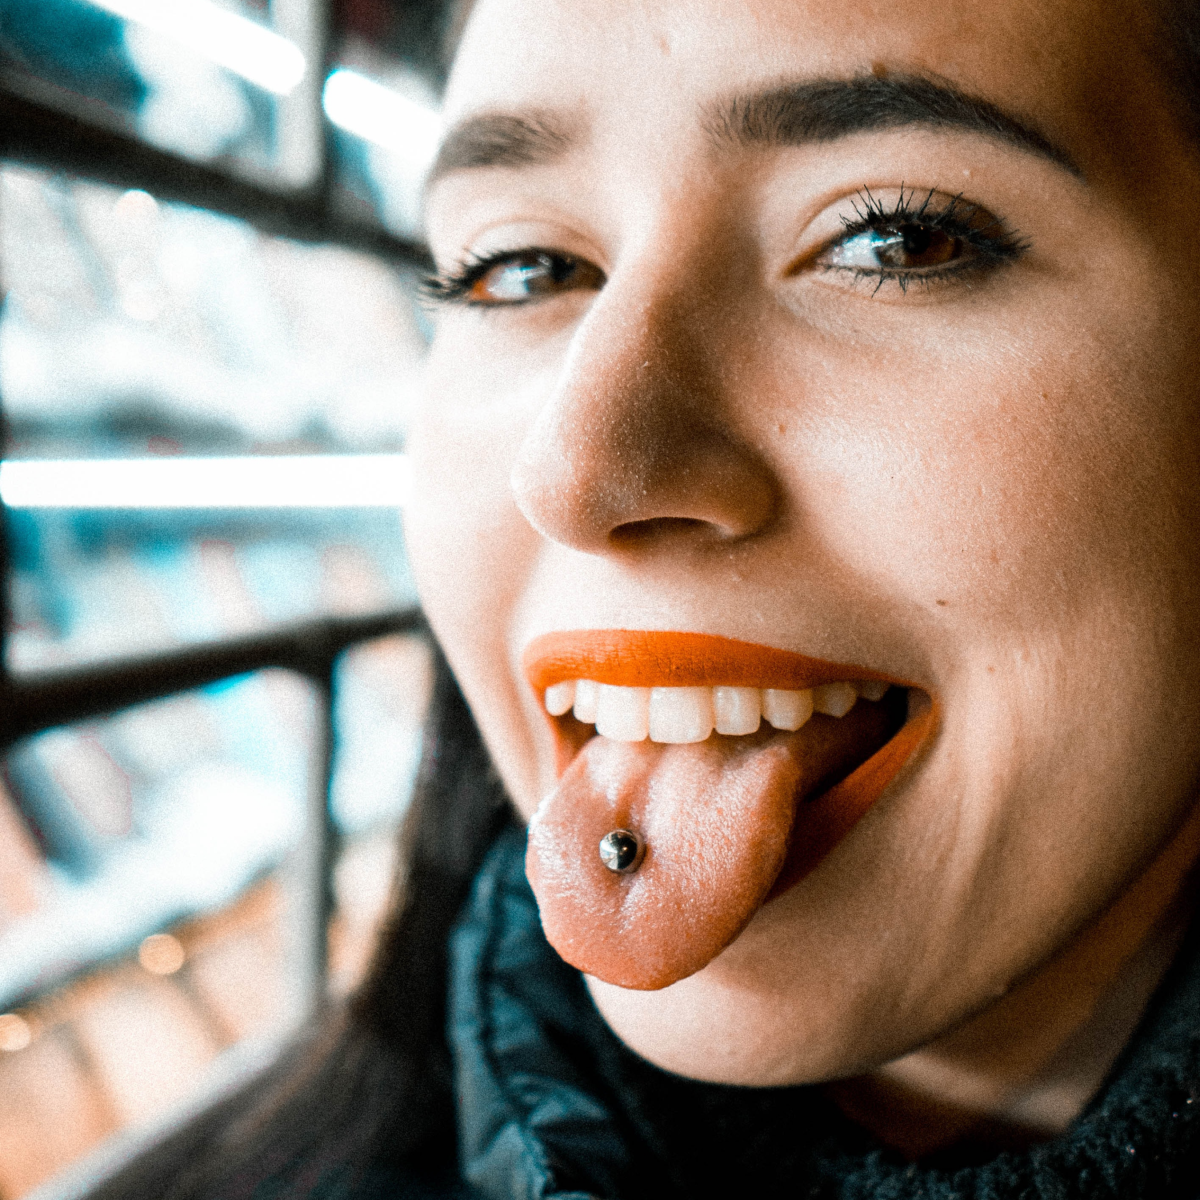 Everything You Need to Know About Tongue Piercings